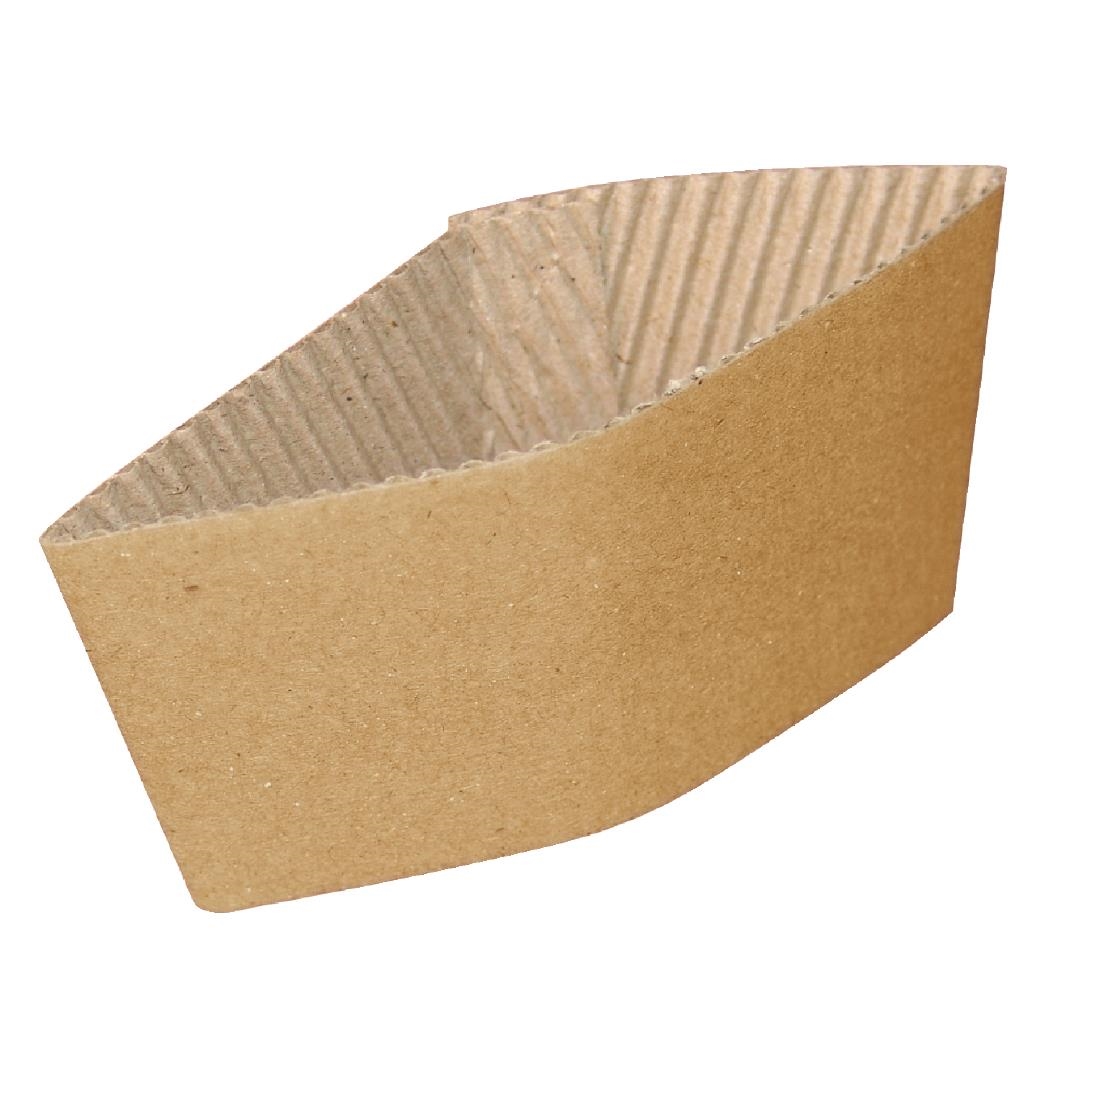 Corrugated Cup Sleeves for 8oz Cup (Pack of 1000)